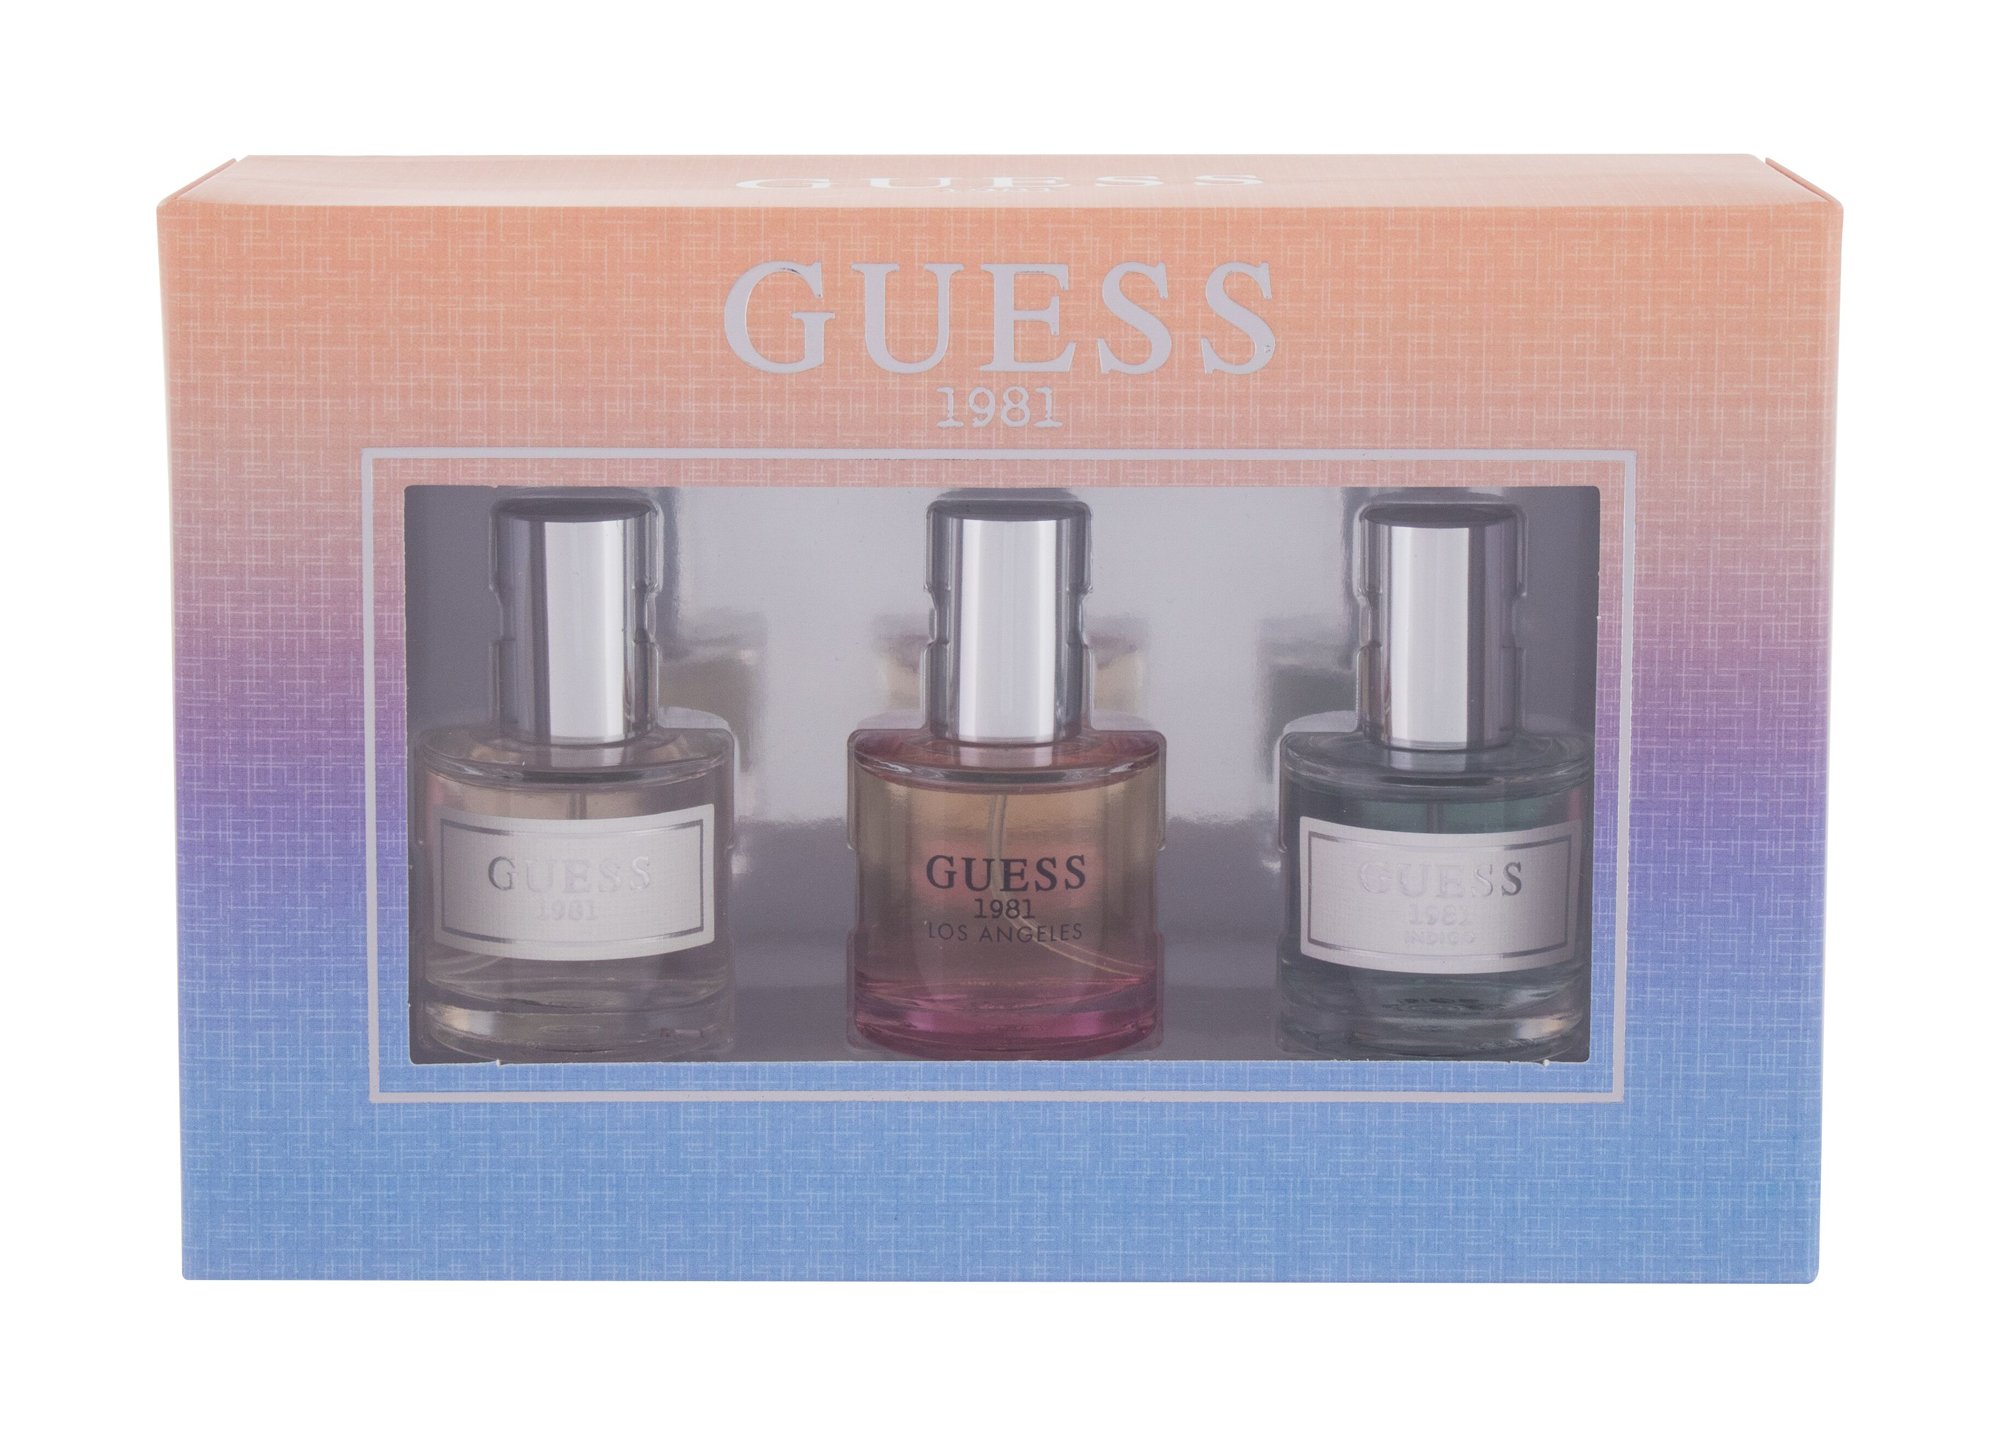 Guess Guess 1981 15ml Edt 15 ml + Edt Guess 1981 Los Angeles 15 ml + Edt Guess 1981 Indigo 15 ml Kvepalai Moterims EDT Rinkinys